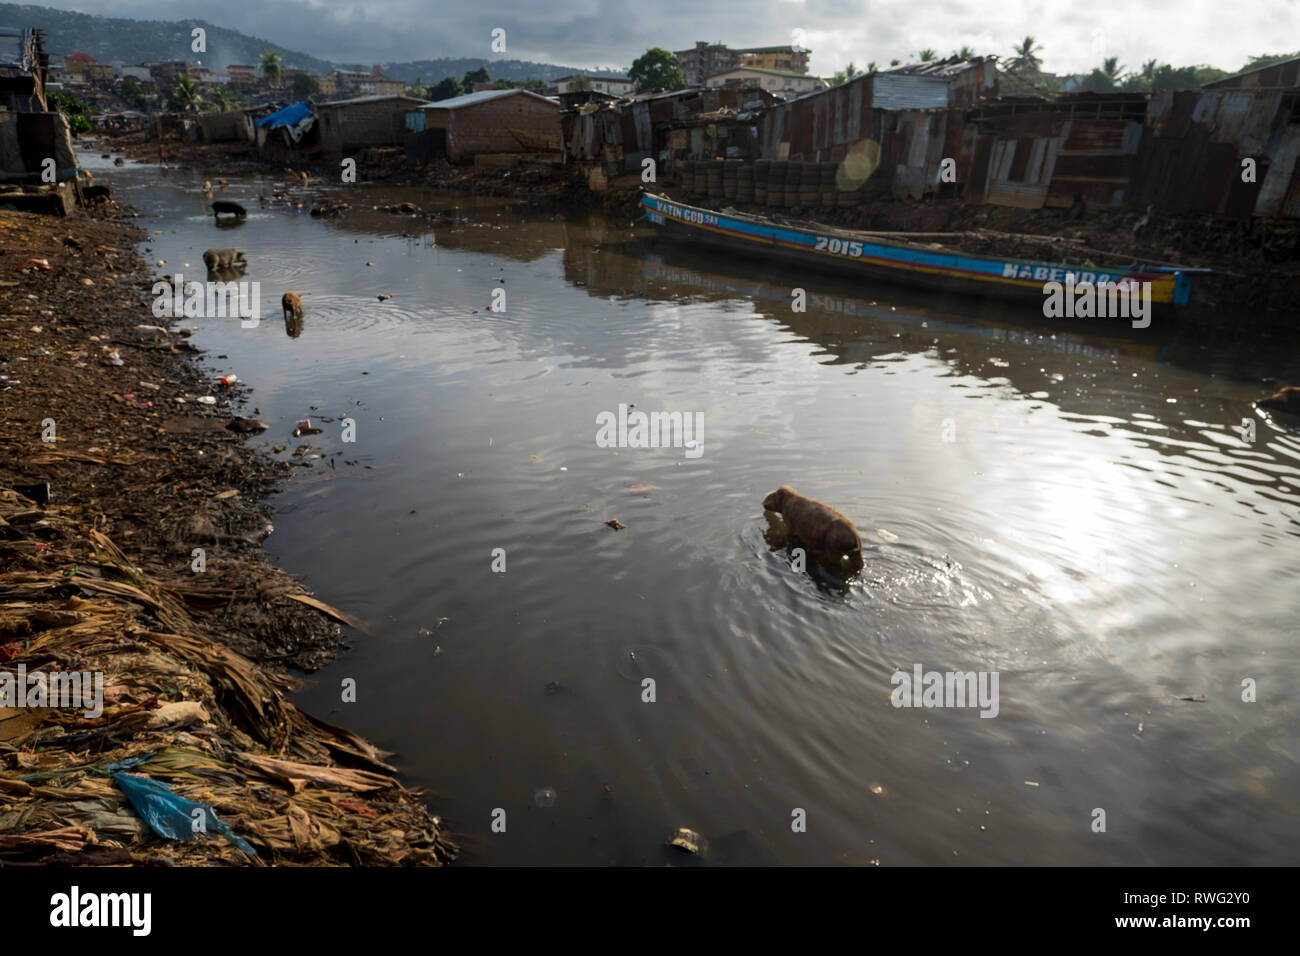 Kroo Bay, one of the worst slums in Freetown, Sierra Leone. A polluted canal with pigs. Stock Photo